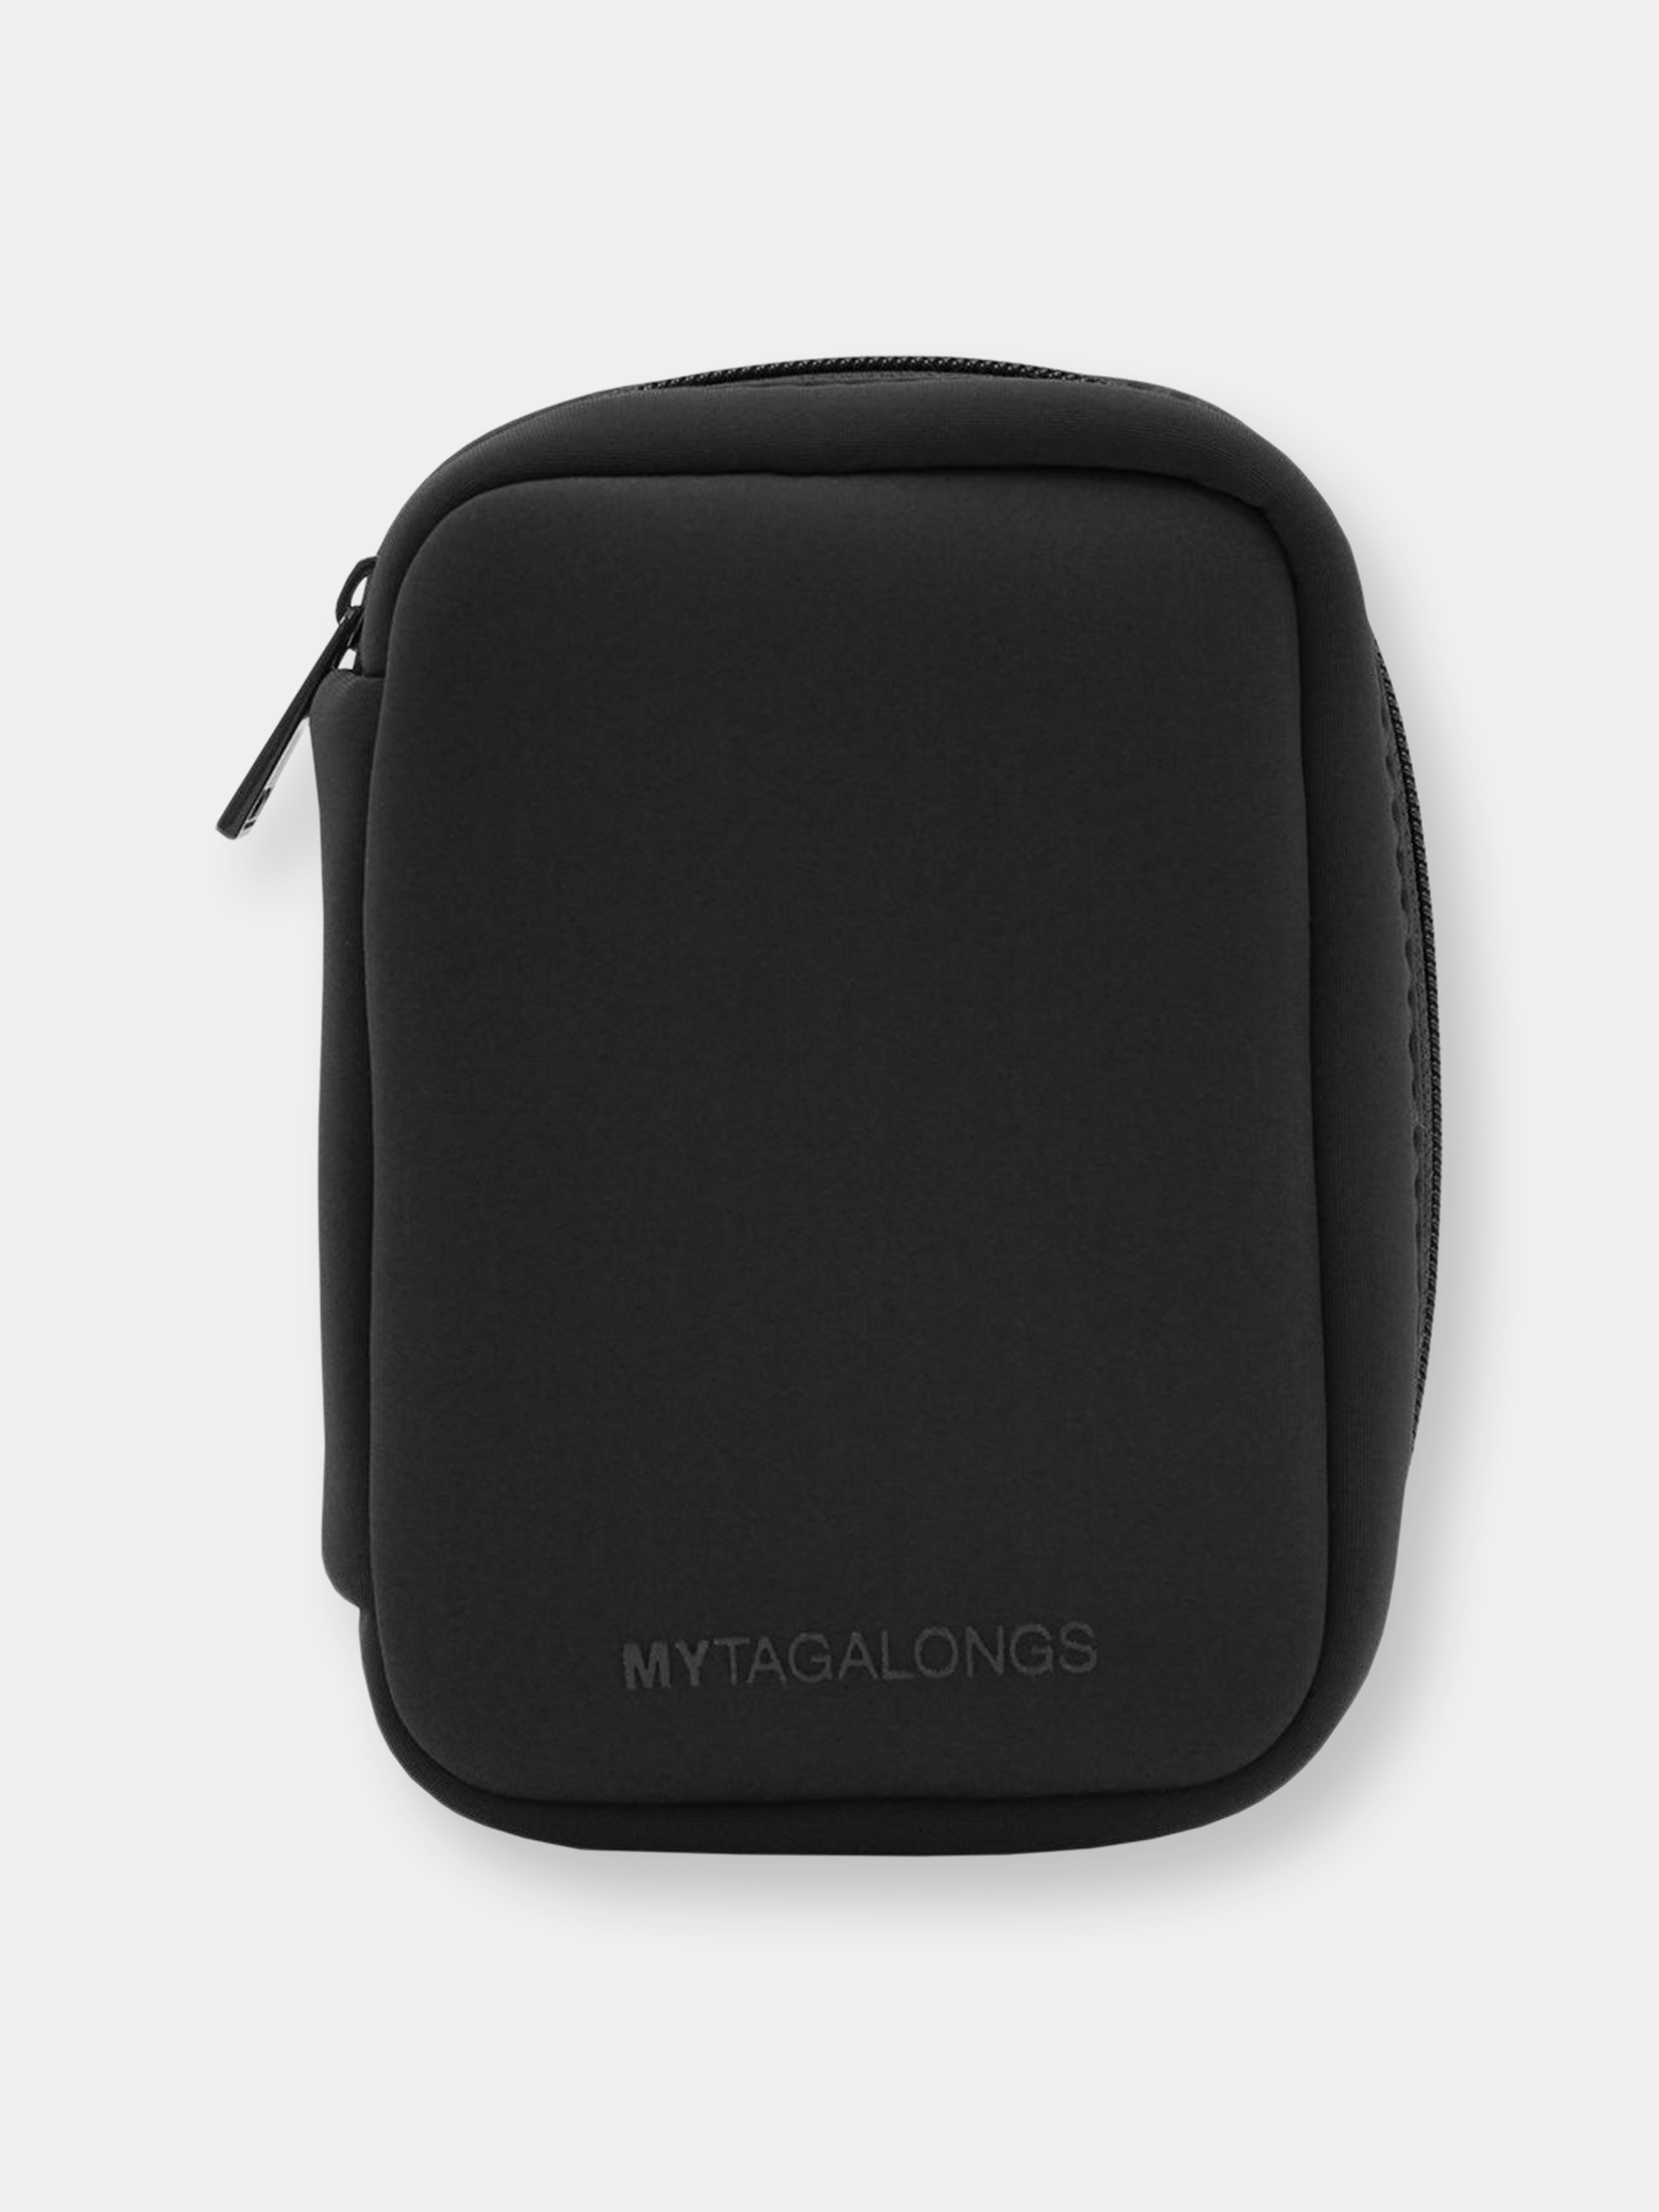 Mytagalongs Connect Cord Organizer In Black